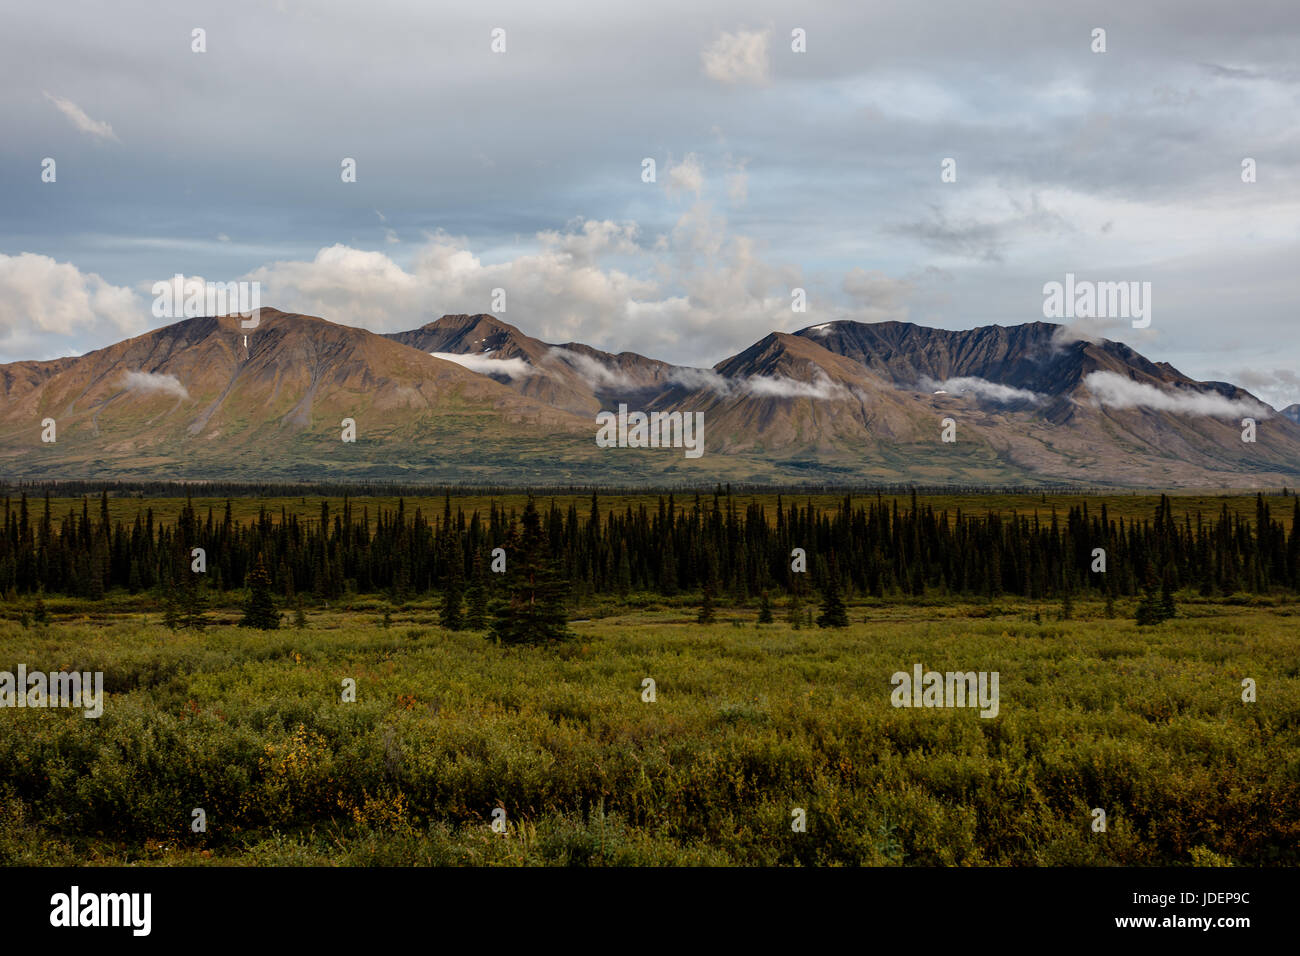 Alaska mountain range in Denali National Park rises high above pine forest and tundra Stock Photo